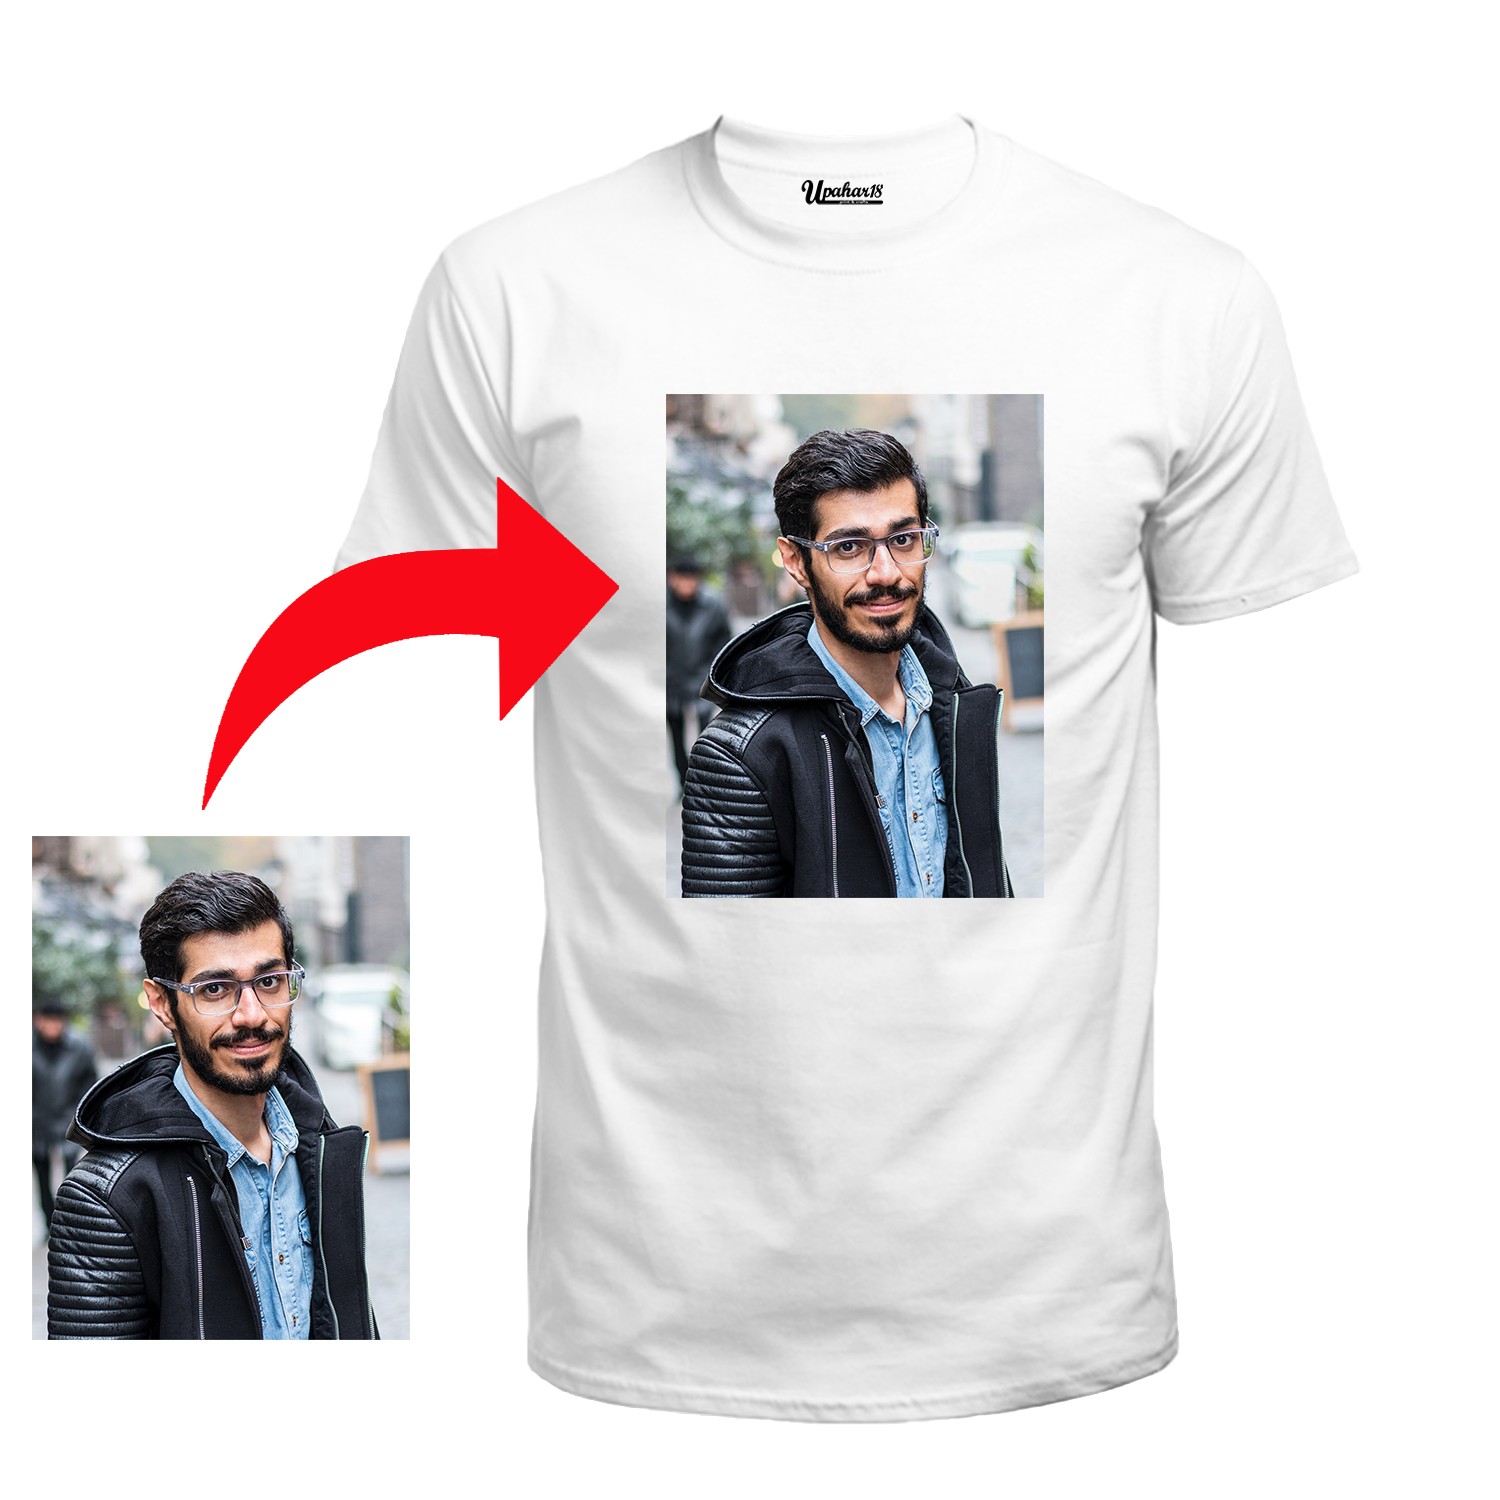 Personalized Photo Printed Polyester Half Sleeve White Tshirt (Soft)